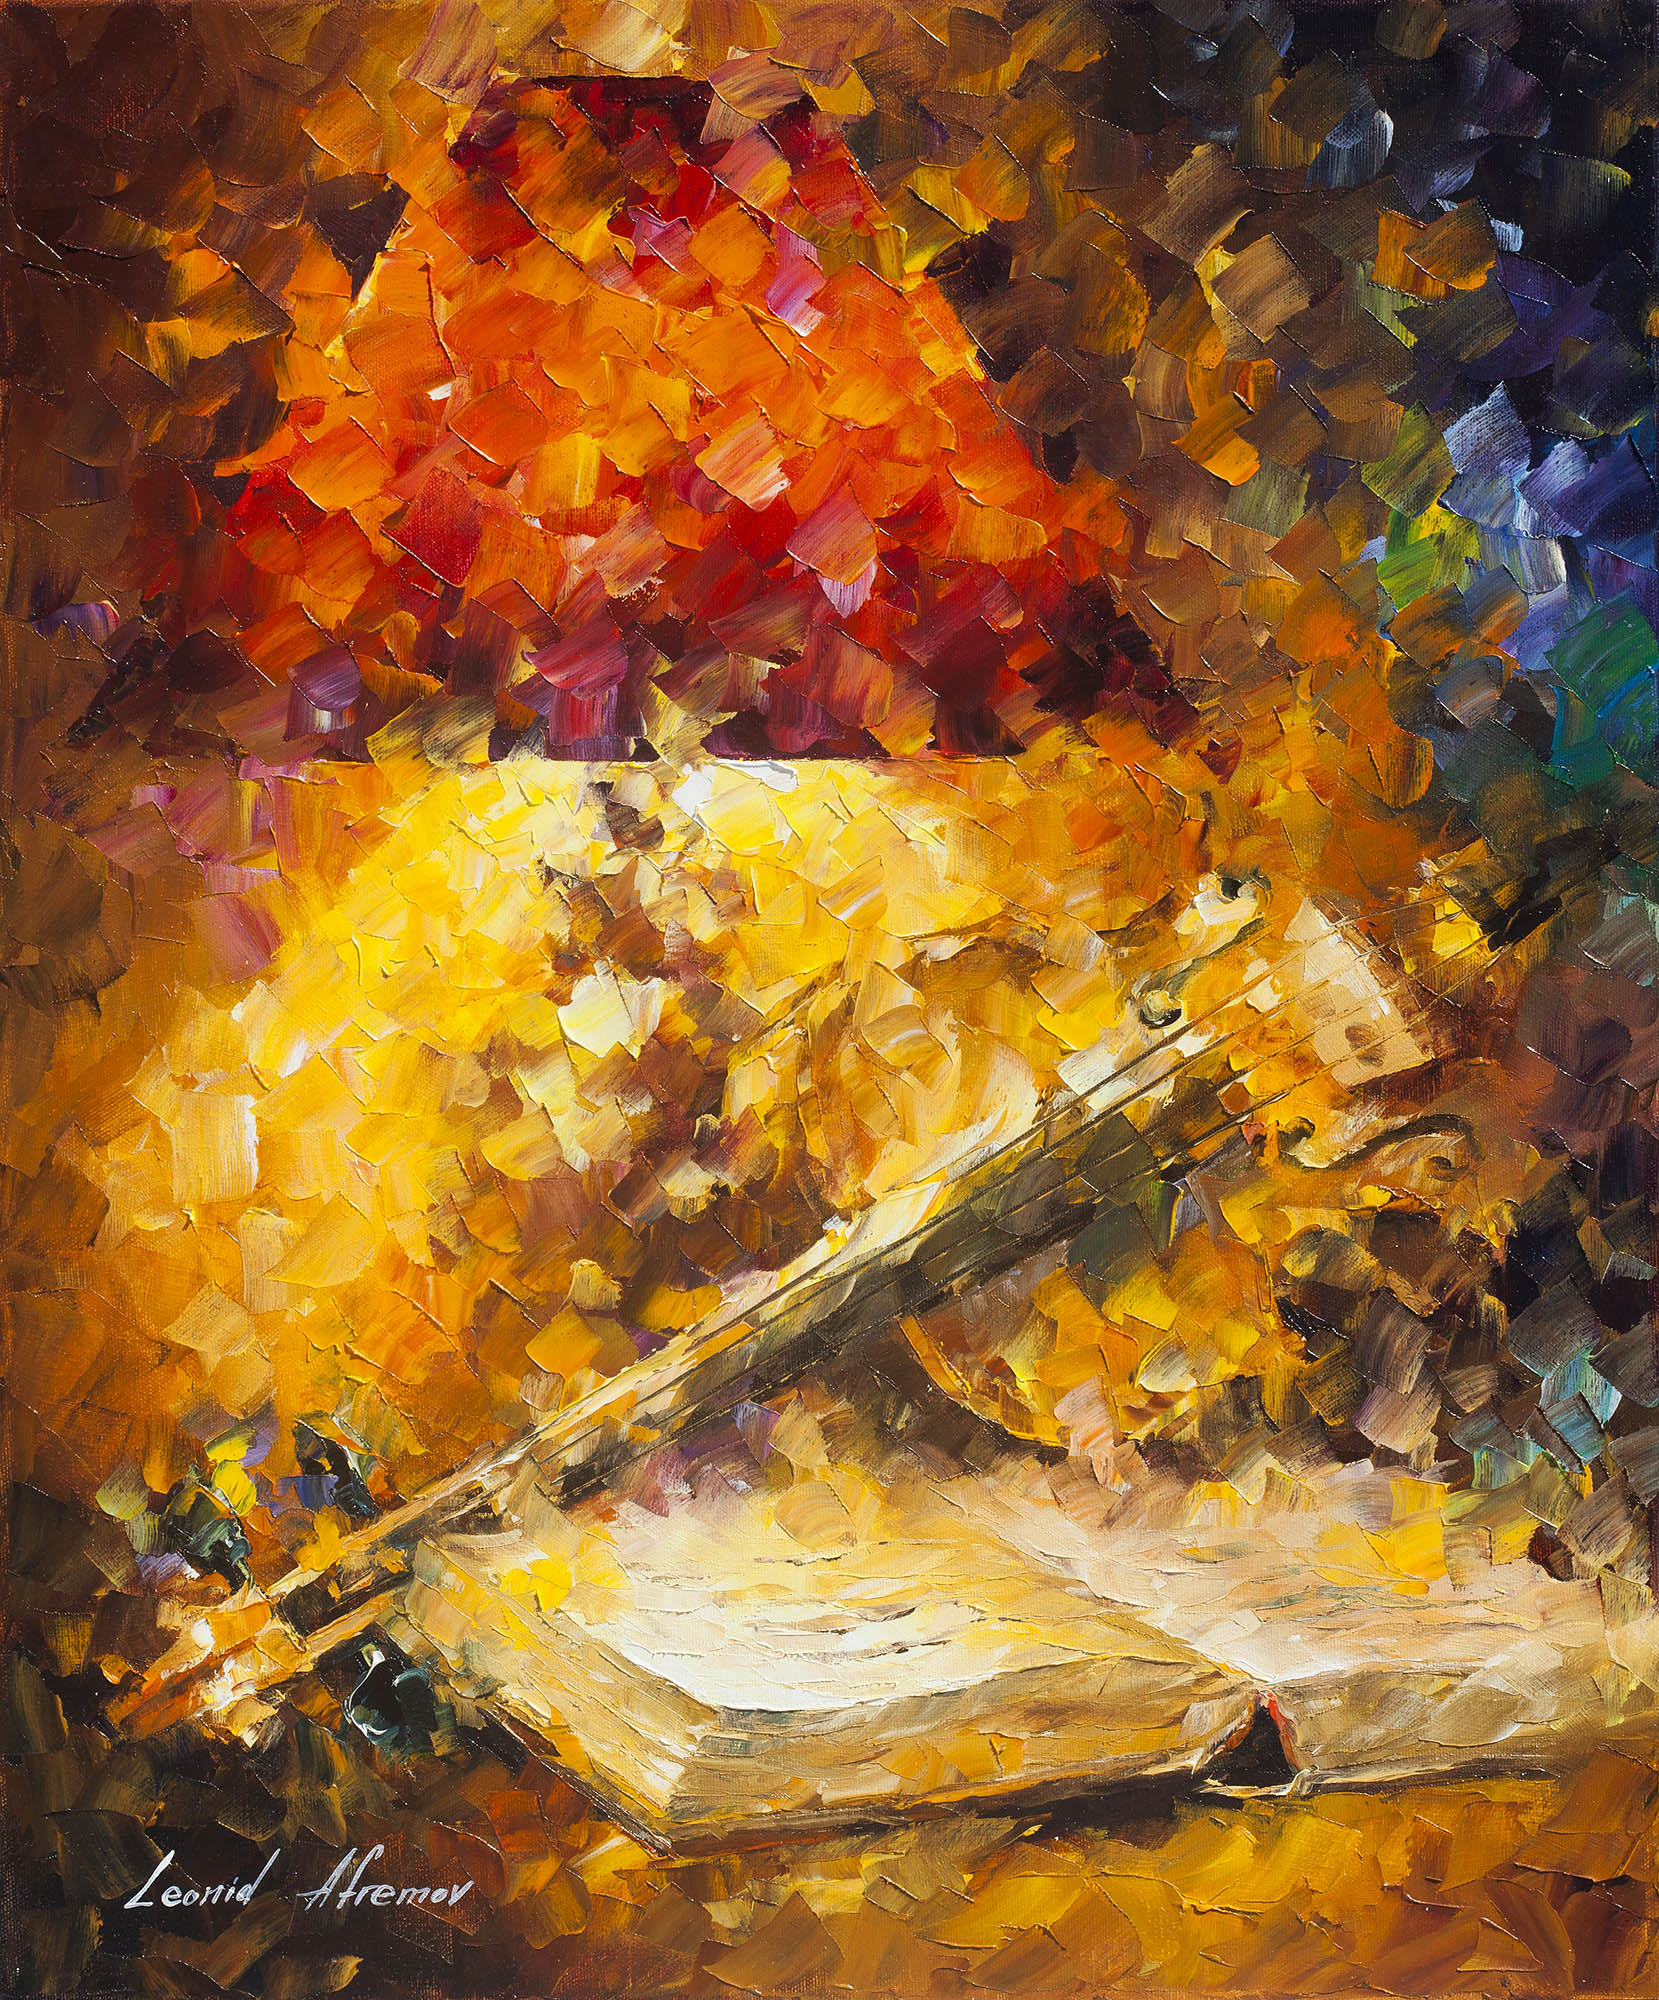 OLD SONG - Original Oil Painting On Canvas By Leonid Afremov - 24